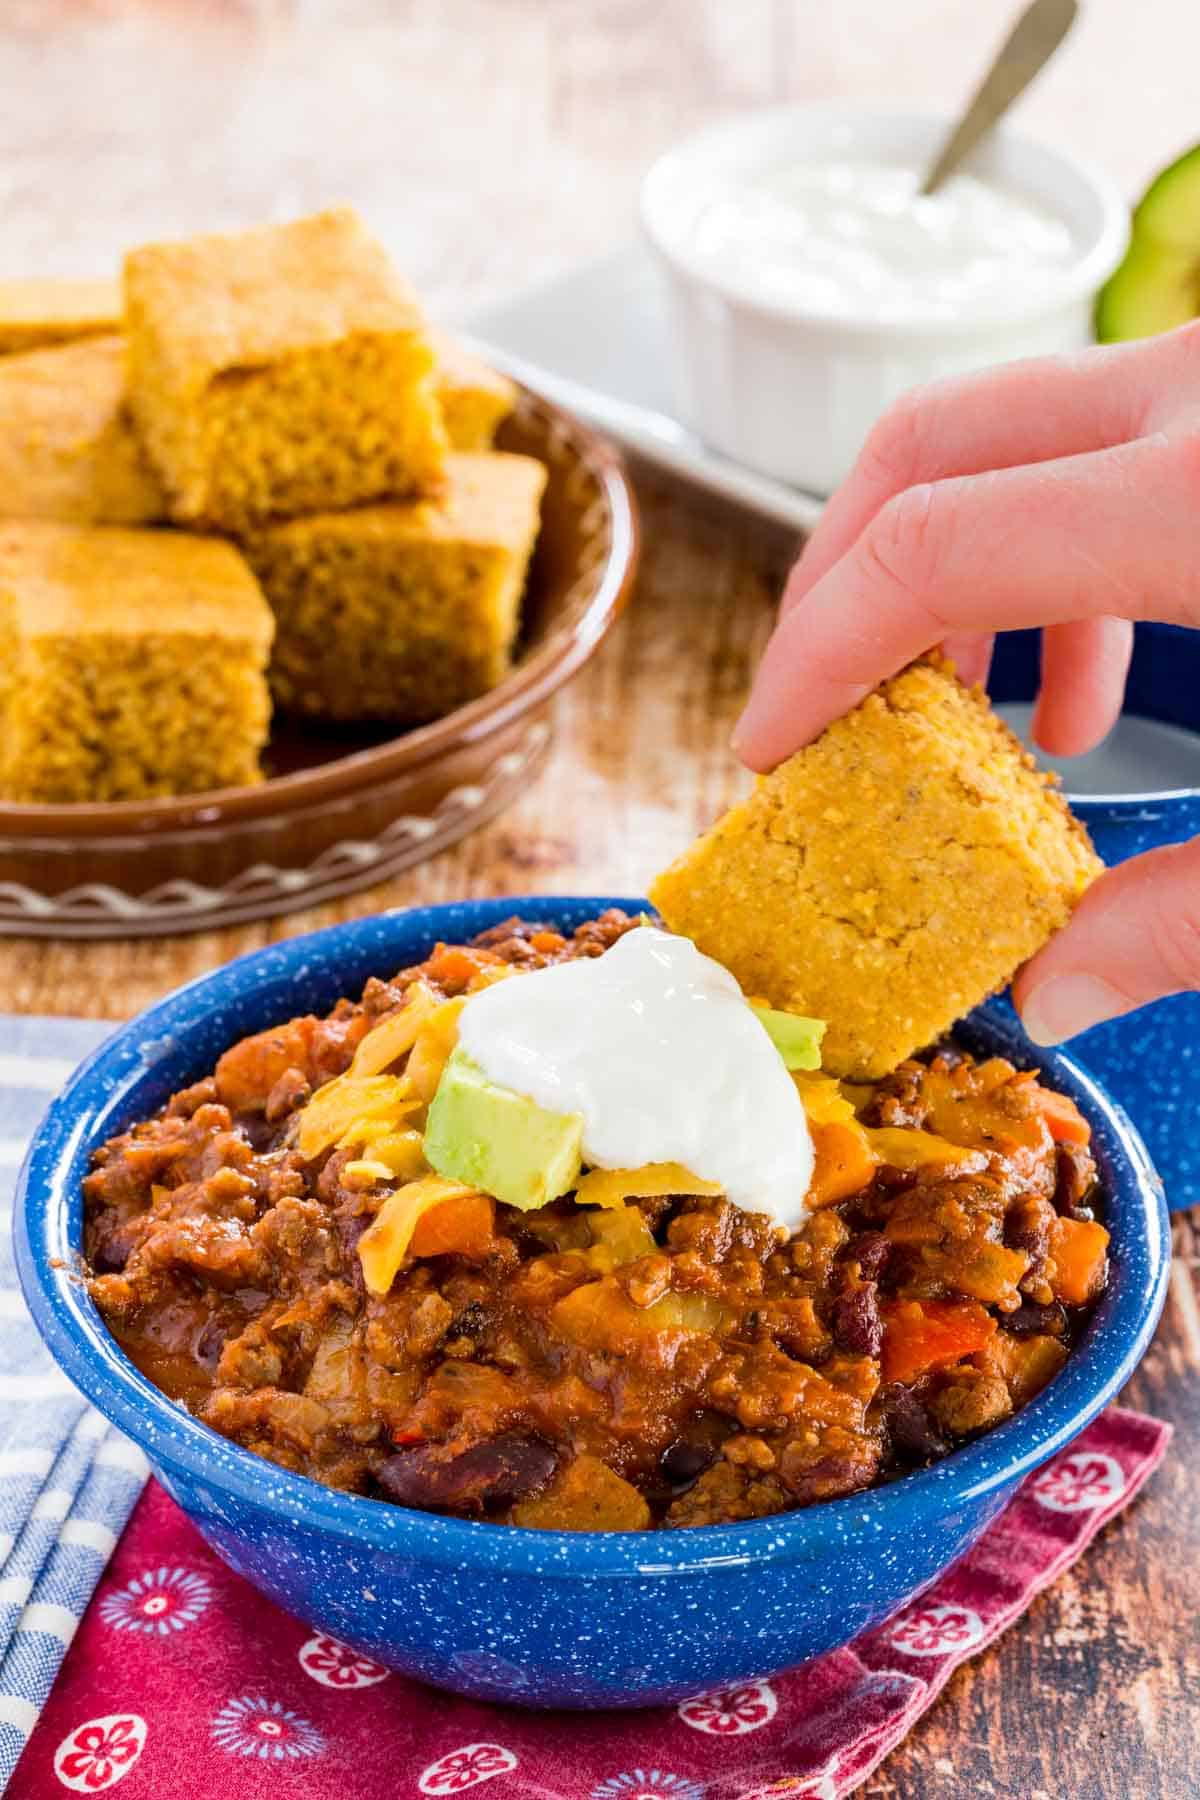 Cornbread is dipped into slow cooker chili topped with sour cream.